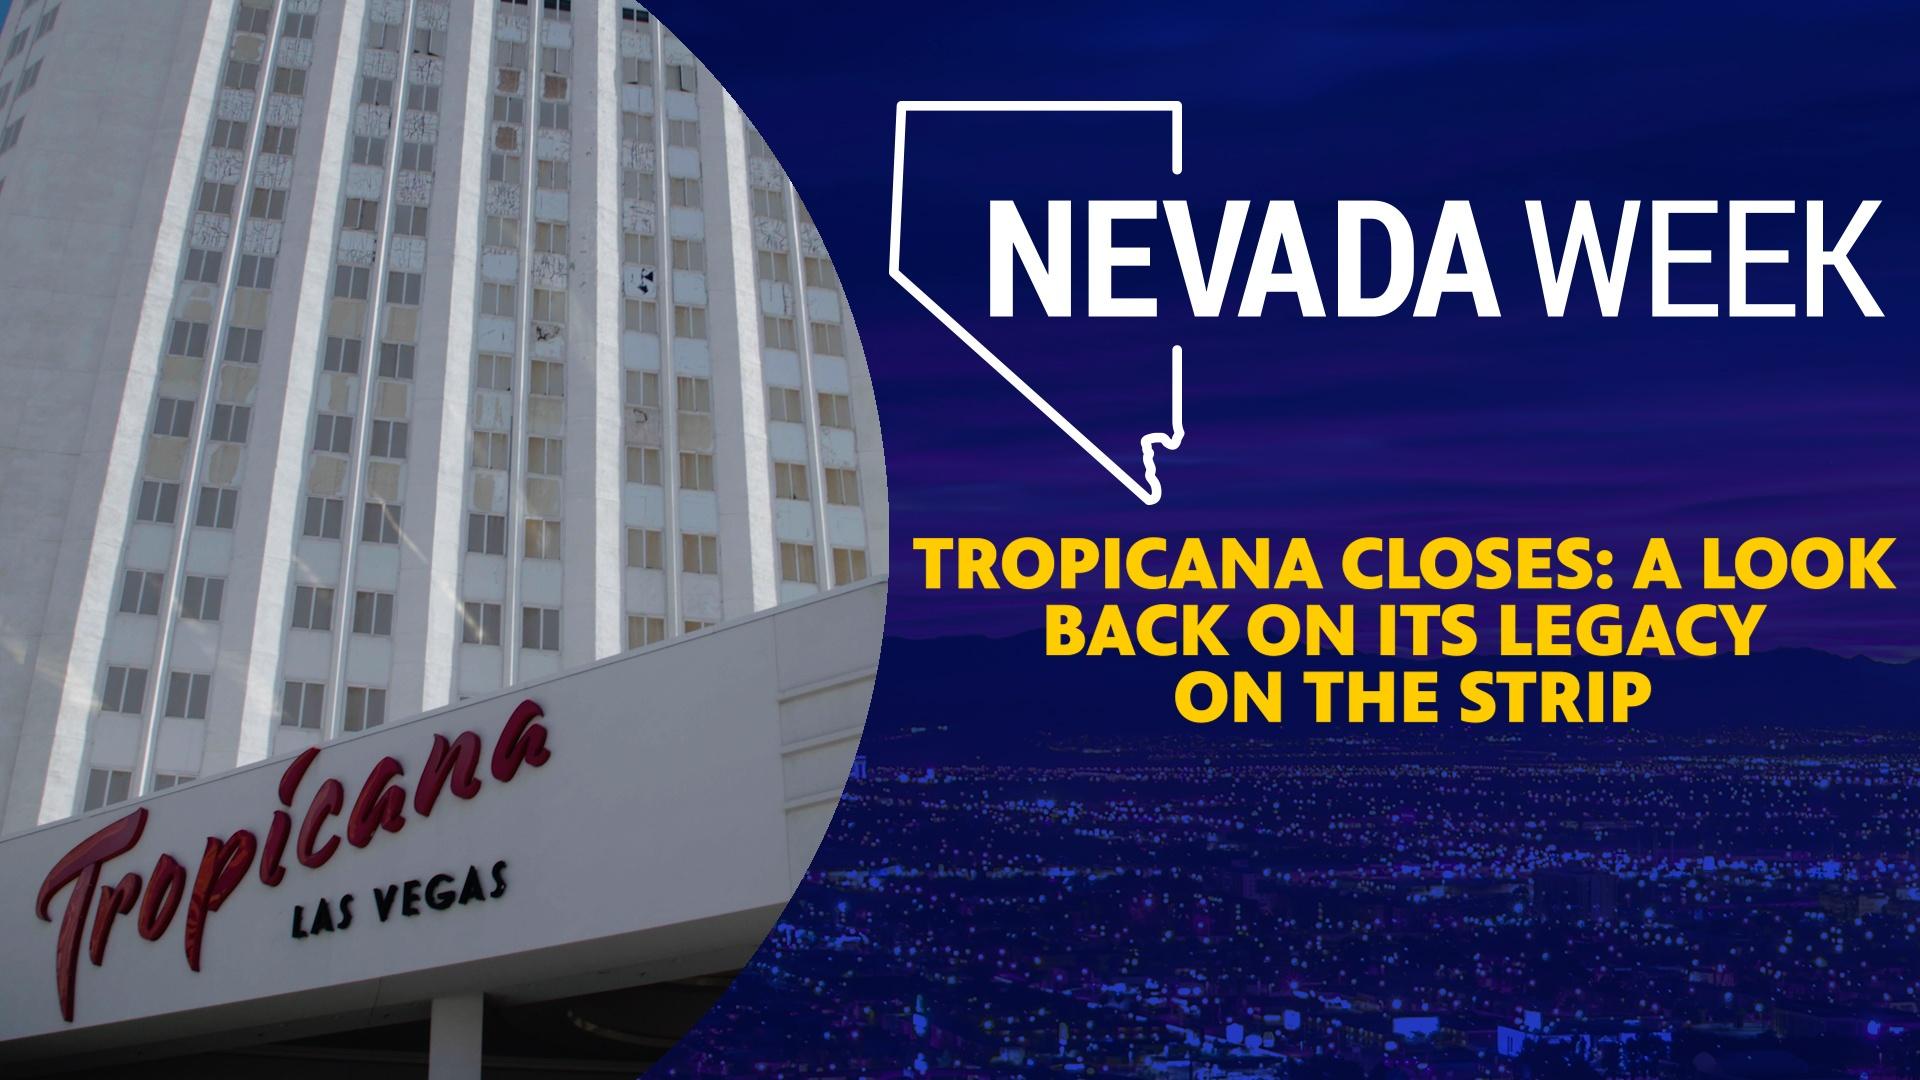 Tropicana Closes: A Look Back on its Legacy on the Strip